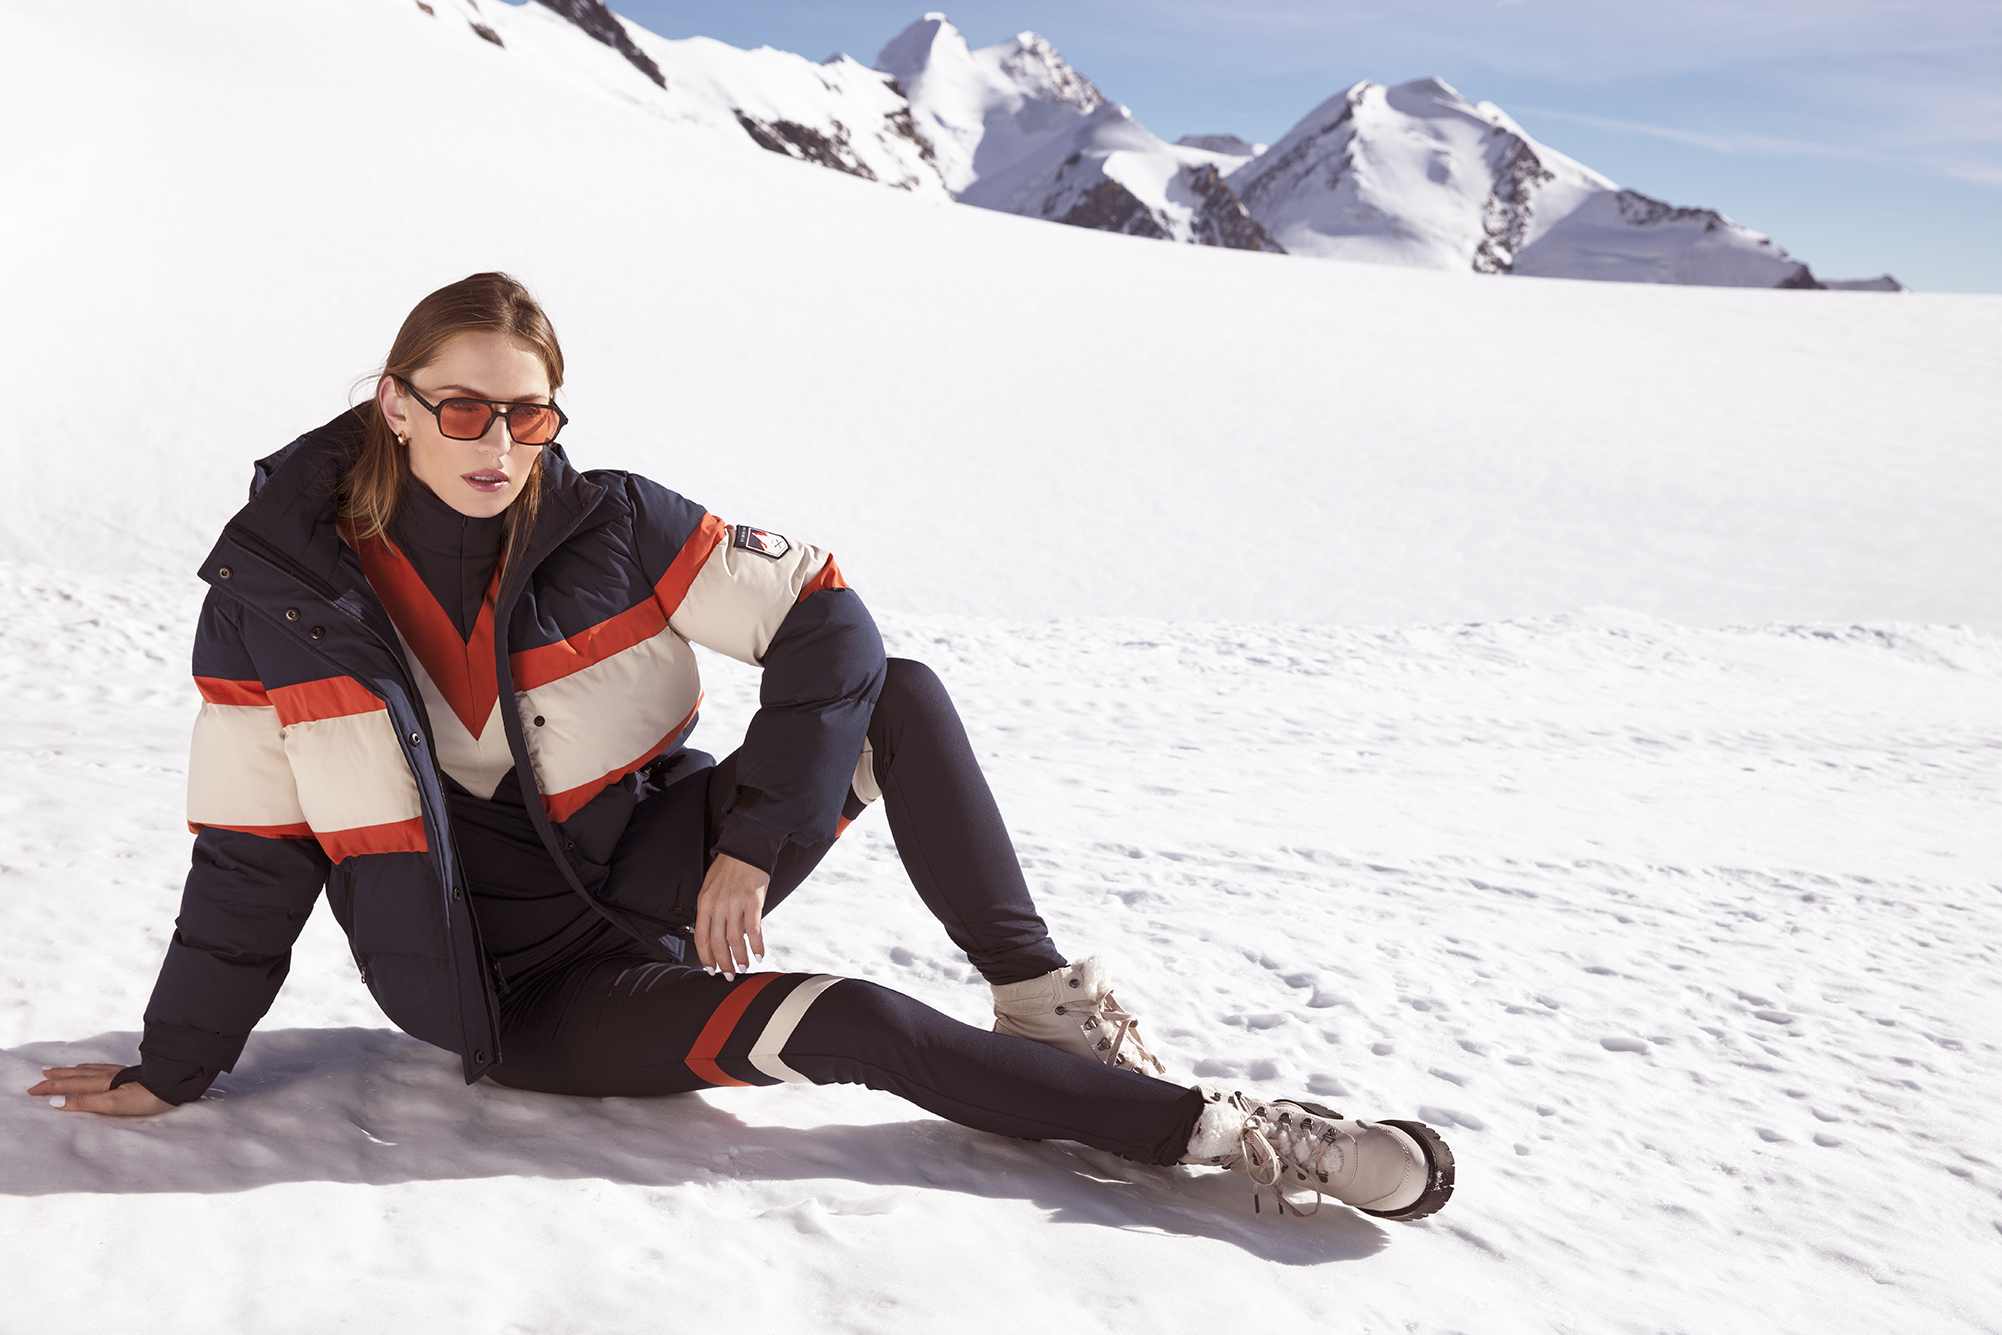 Why The Ski Capsule from By Malina is the ultimate ski collection you need for winter 21/22. 9